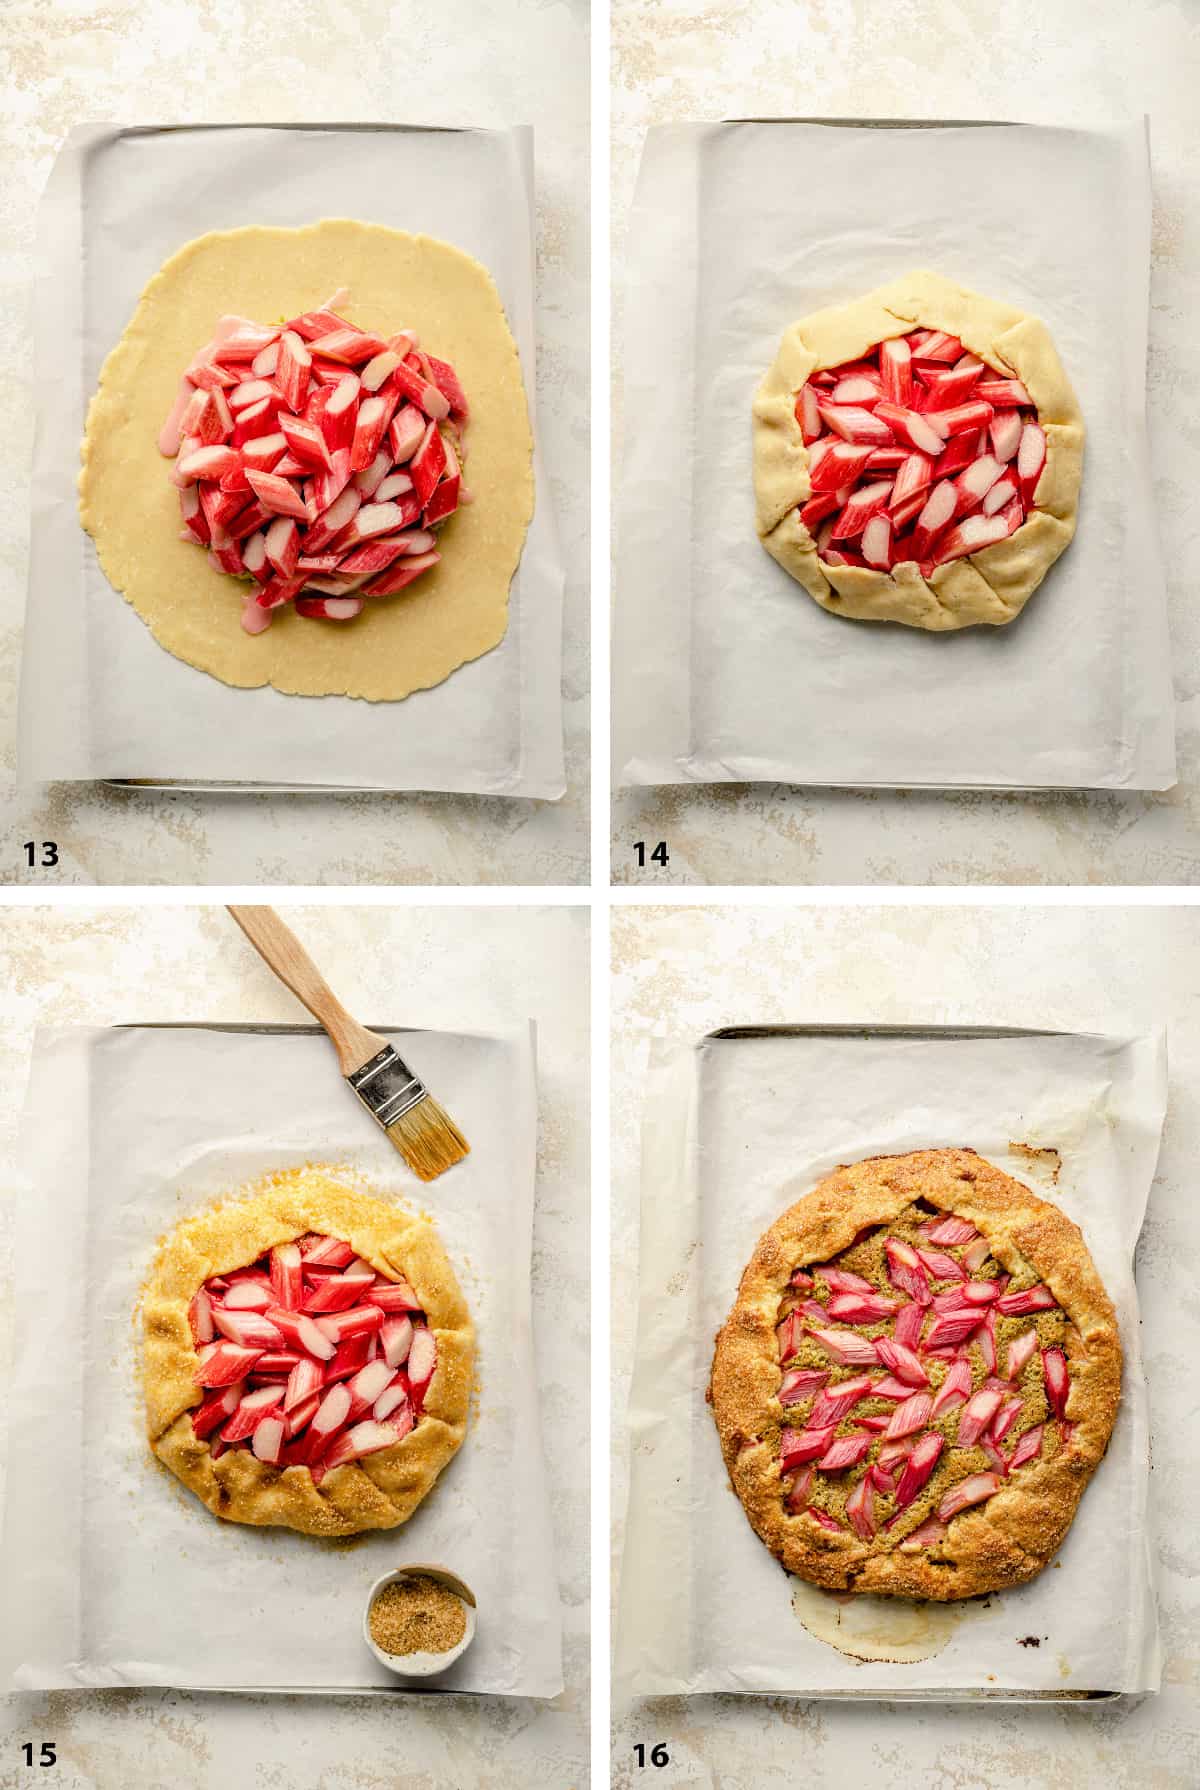 Process of assembling the rhubarb galette and baking it.